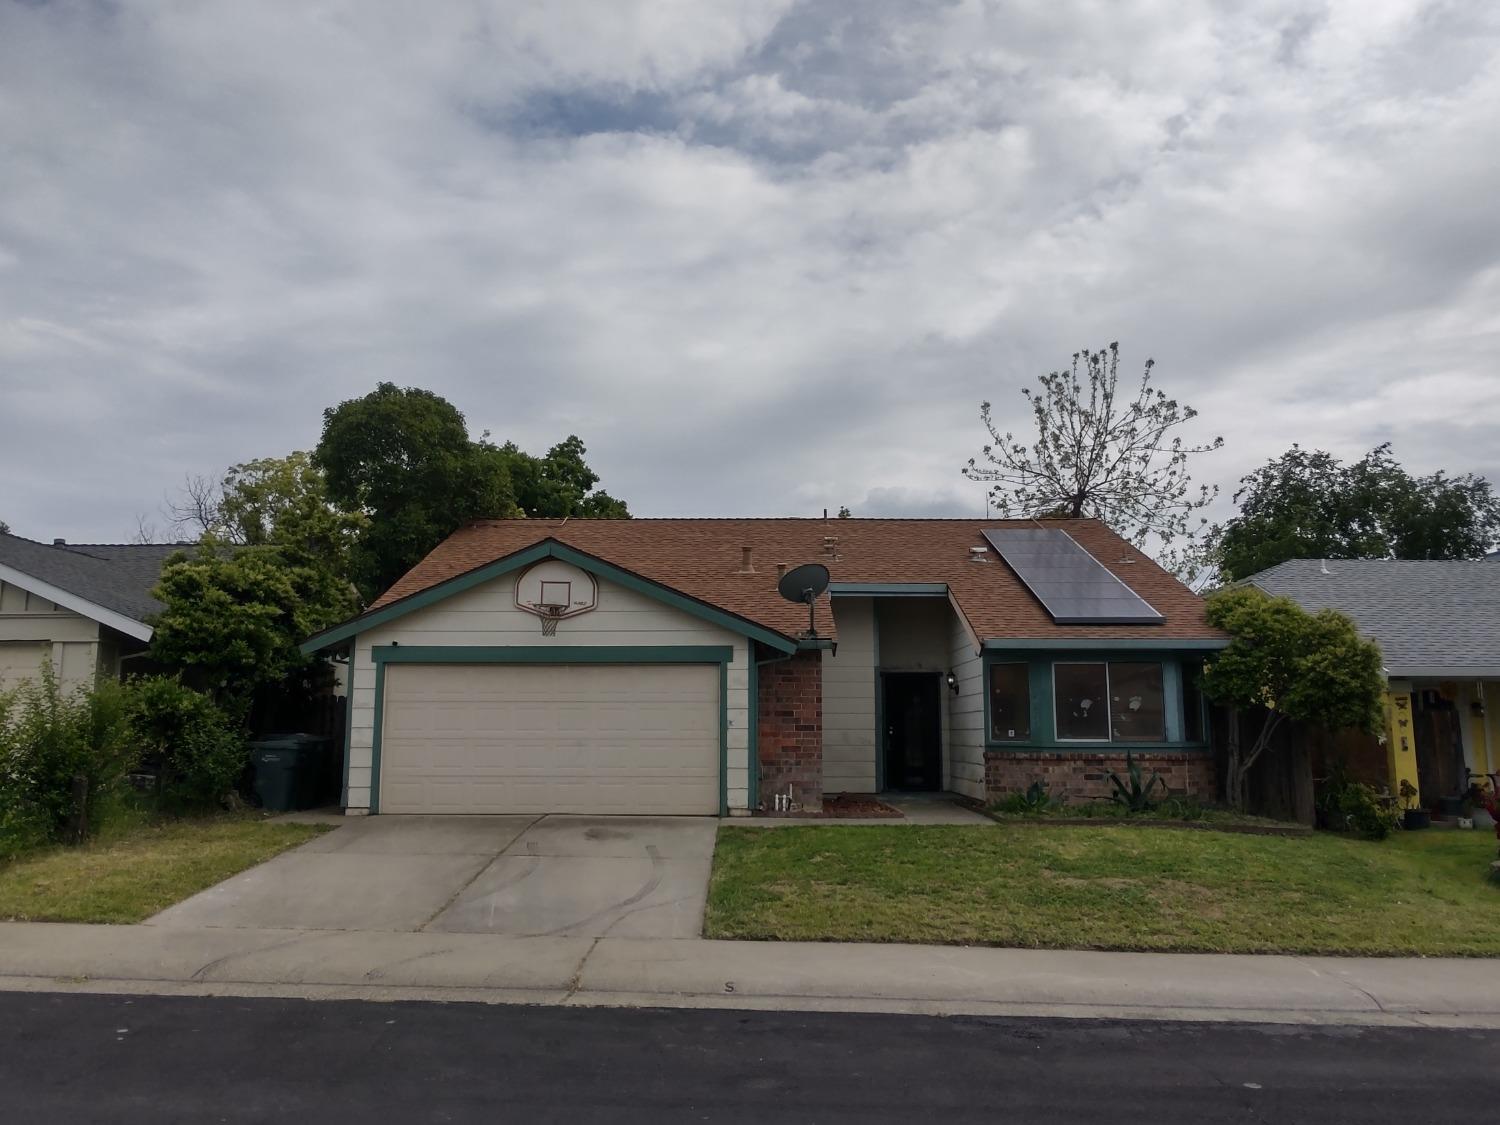 Photo of 4213 N Country Dr in Antelope, CA